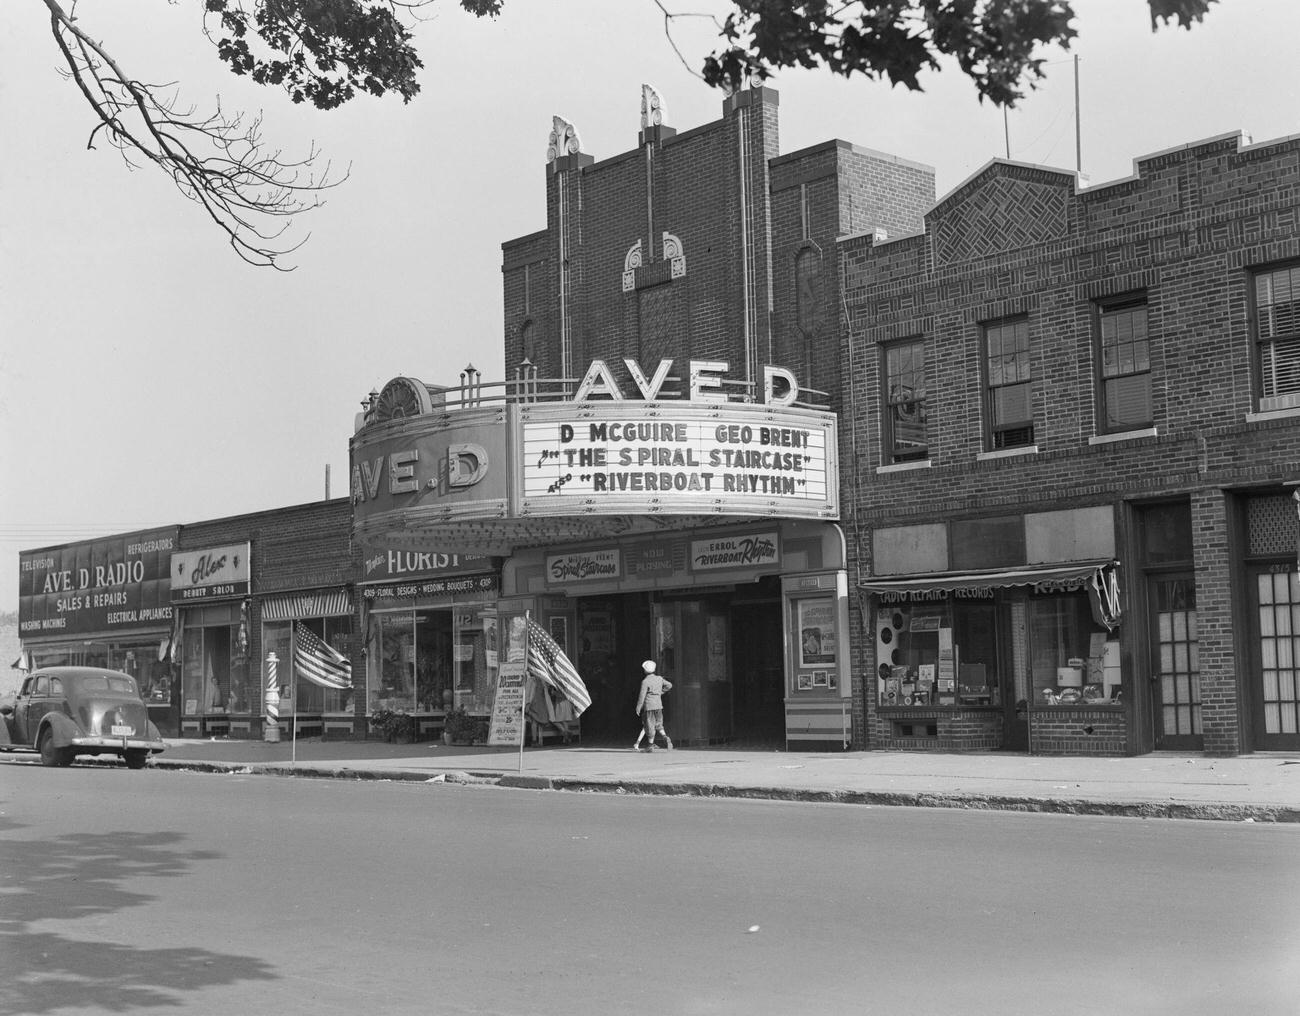 Movies Show At Avenue D Theatre, Brooklyn, 1946.